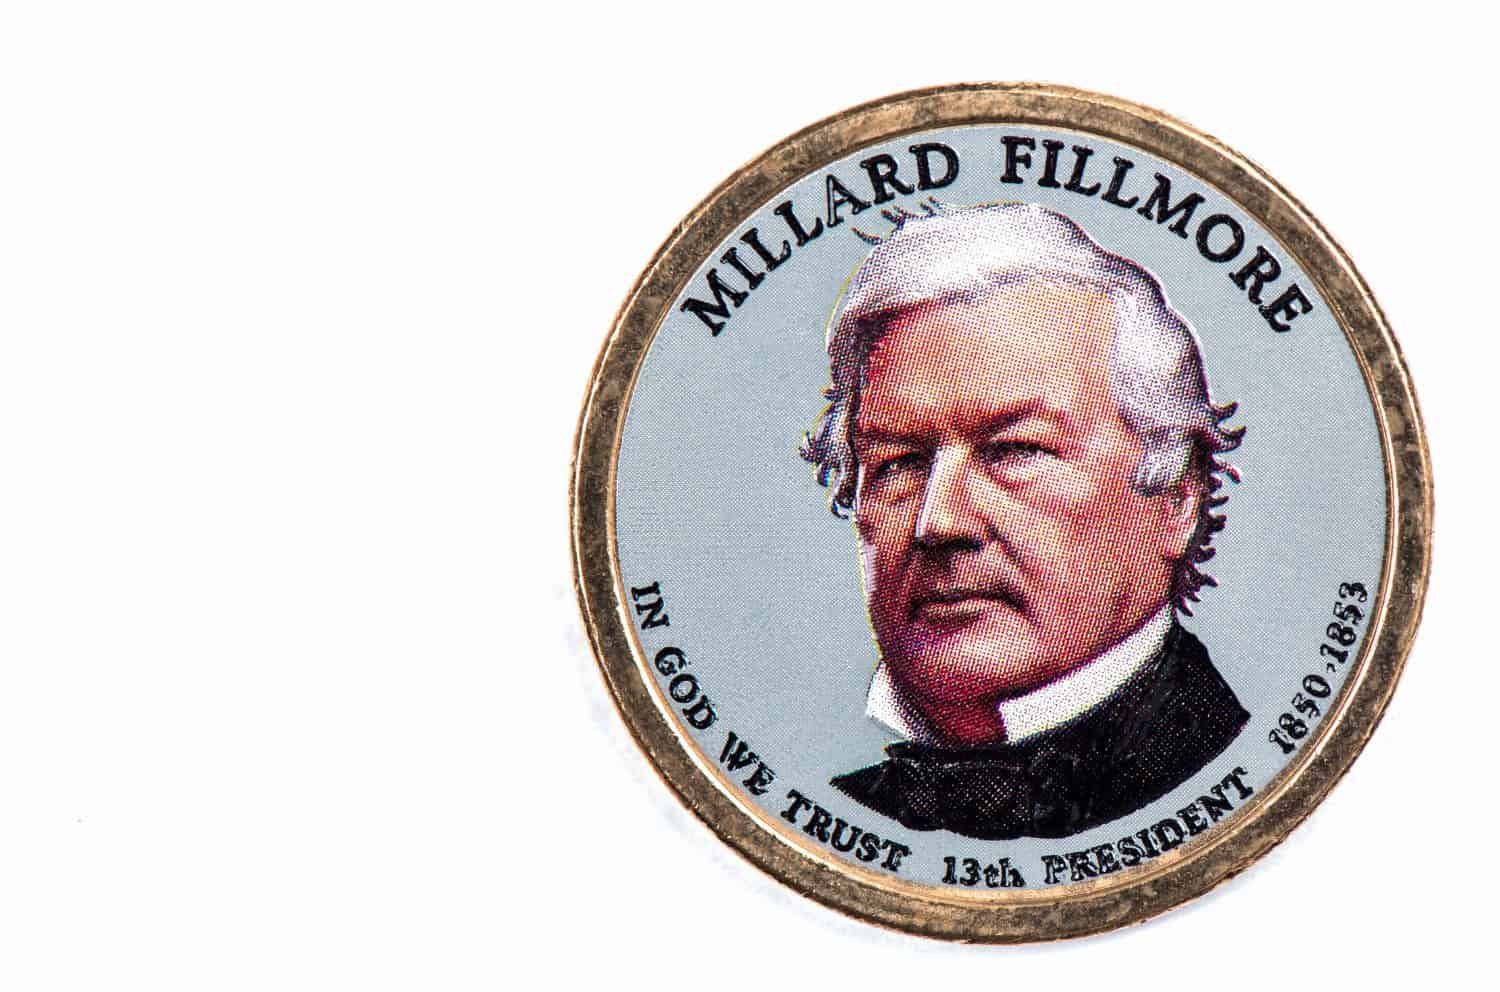 Millard Fillmore Presidential Dollar, USA coin a portrait image of MILLARD FILLMORE IN GOD WE TRUST 13 th PRESIDENT 1850-1853, $1 United Staten of Amekica, Close Up UNC Uncirculated - Collection